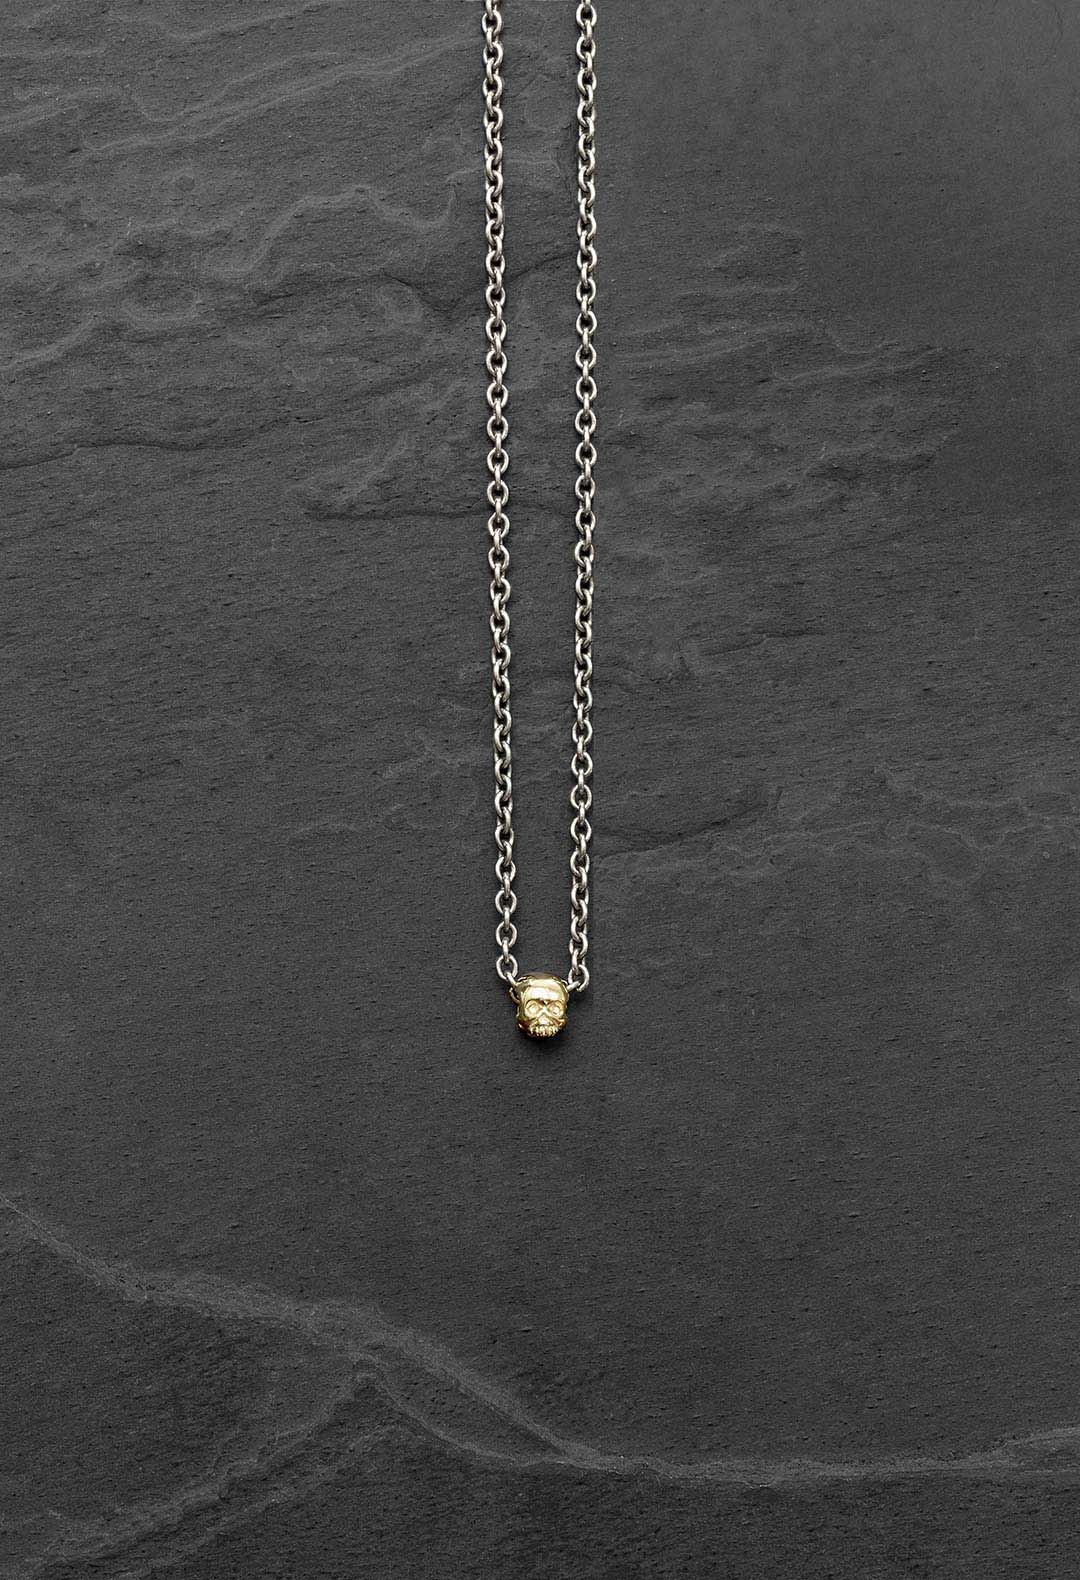 Gold skull bead necklace